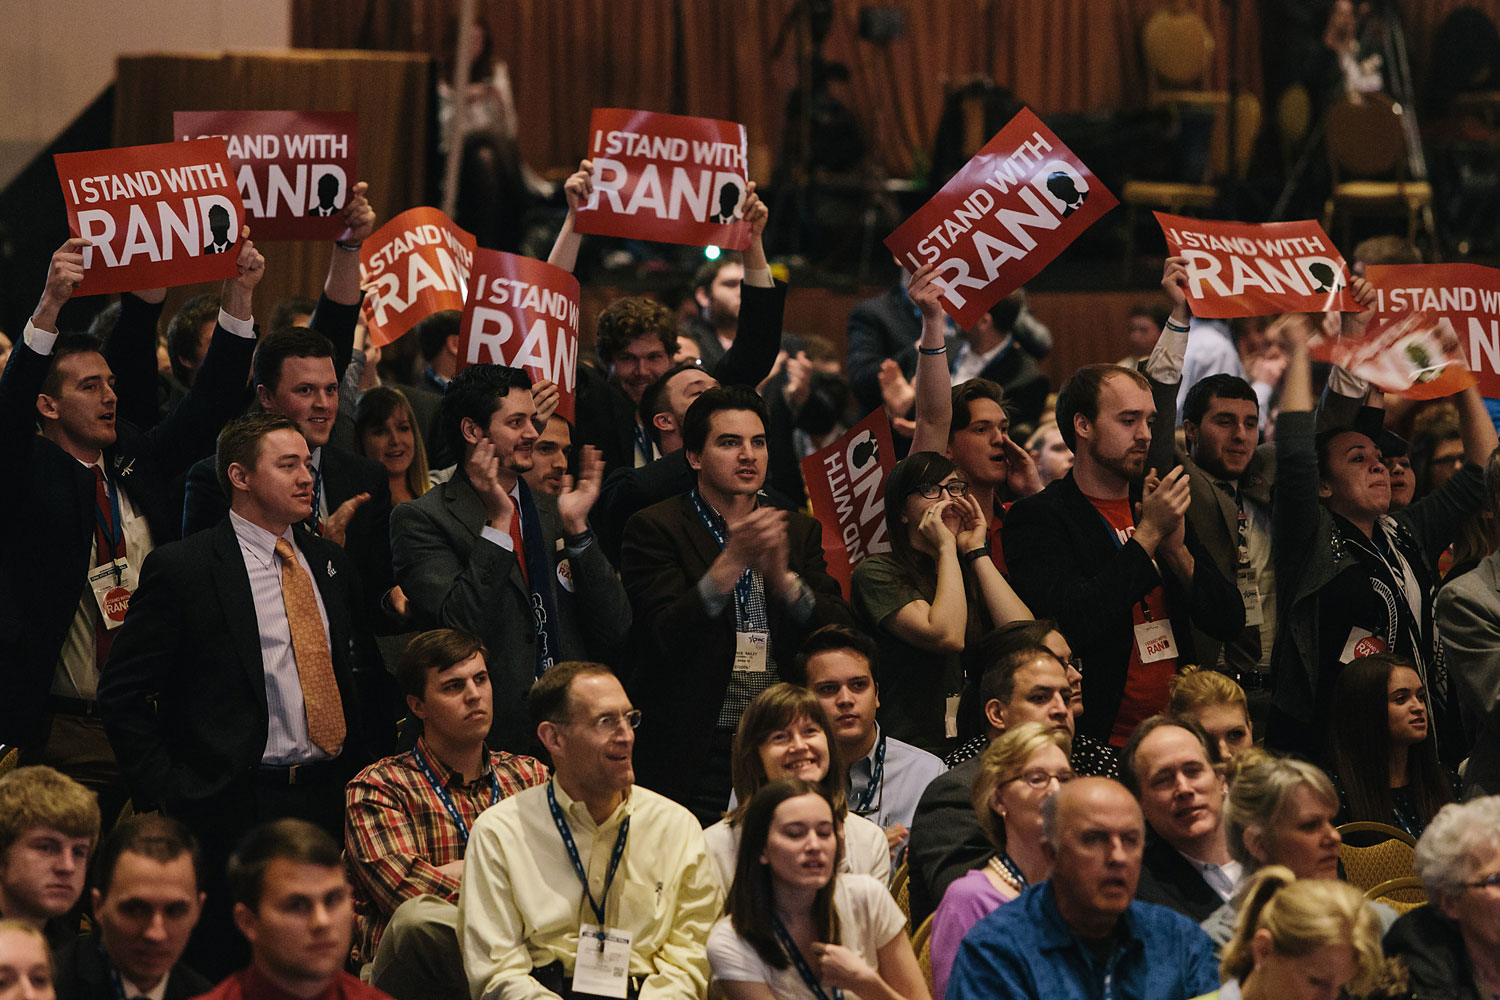 Rand Paul supporters stand and cheer when the results of a straw poll show Rand Paul winning the GOP Presidential nomination during the final day of the Conservative Political Action Conference (CPAC) at the Gaylord National Resort & Convention Center in National Harbor, Md. (Lexey Swall—GRAIN for TIME)